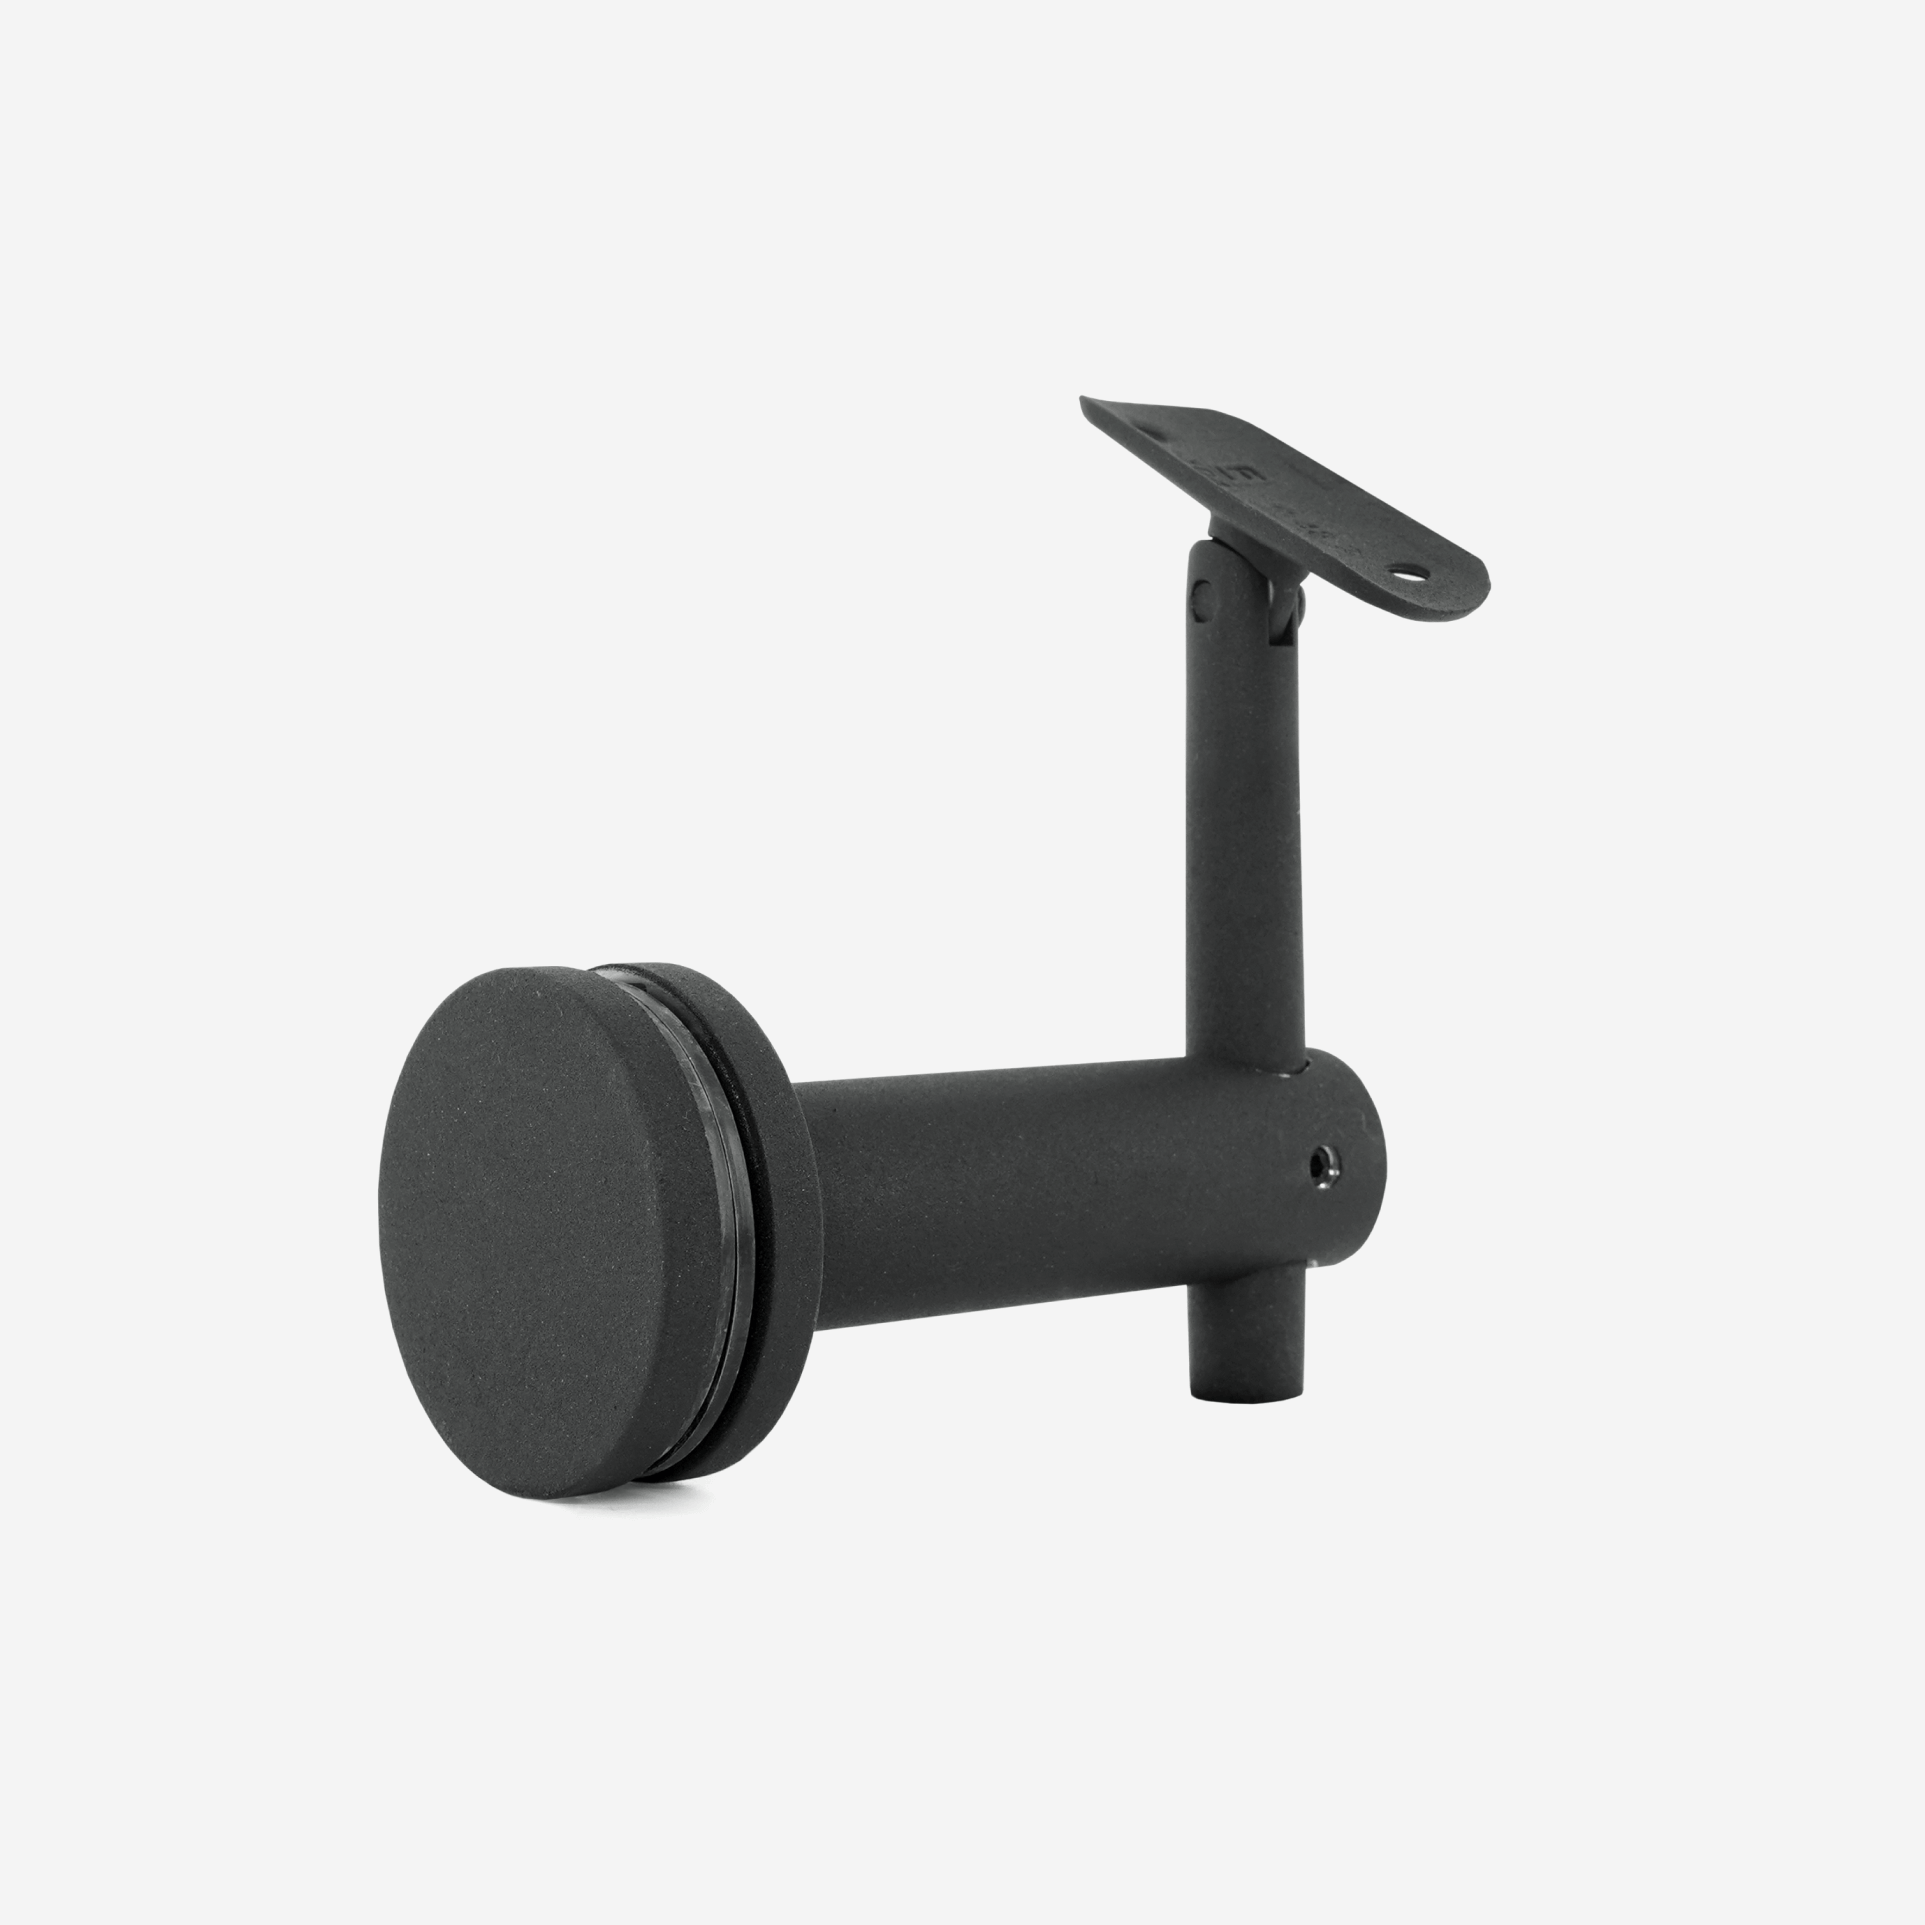 CG Matte Black Glass Mounted Handrail Bracket with Round Handrail Adapter Plate